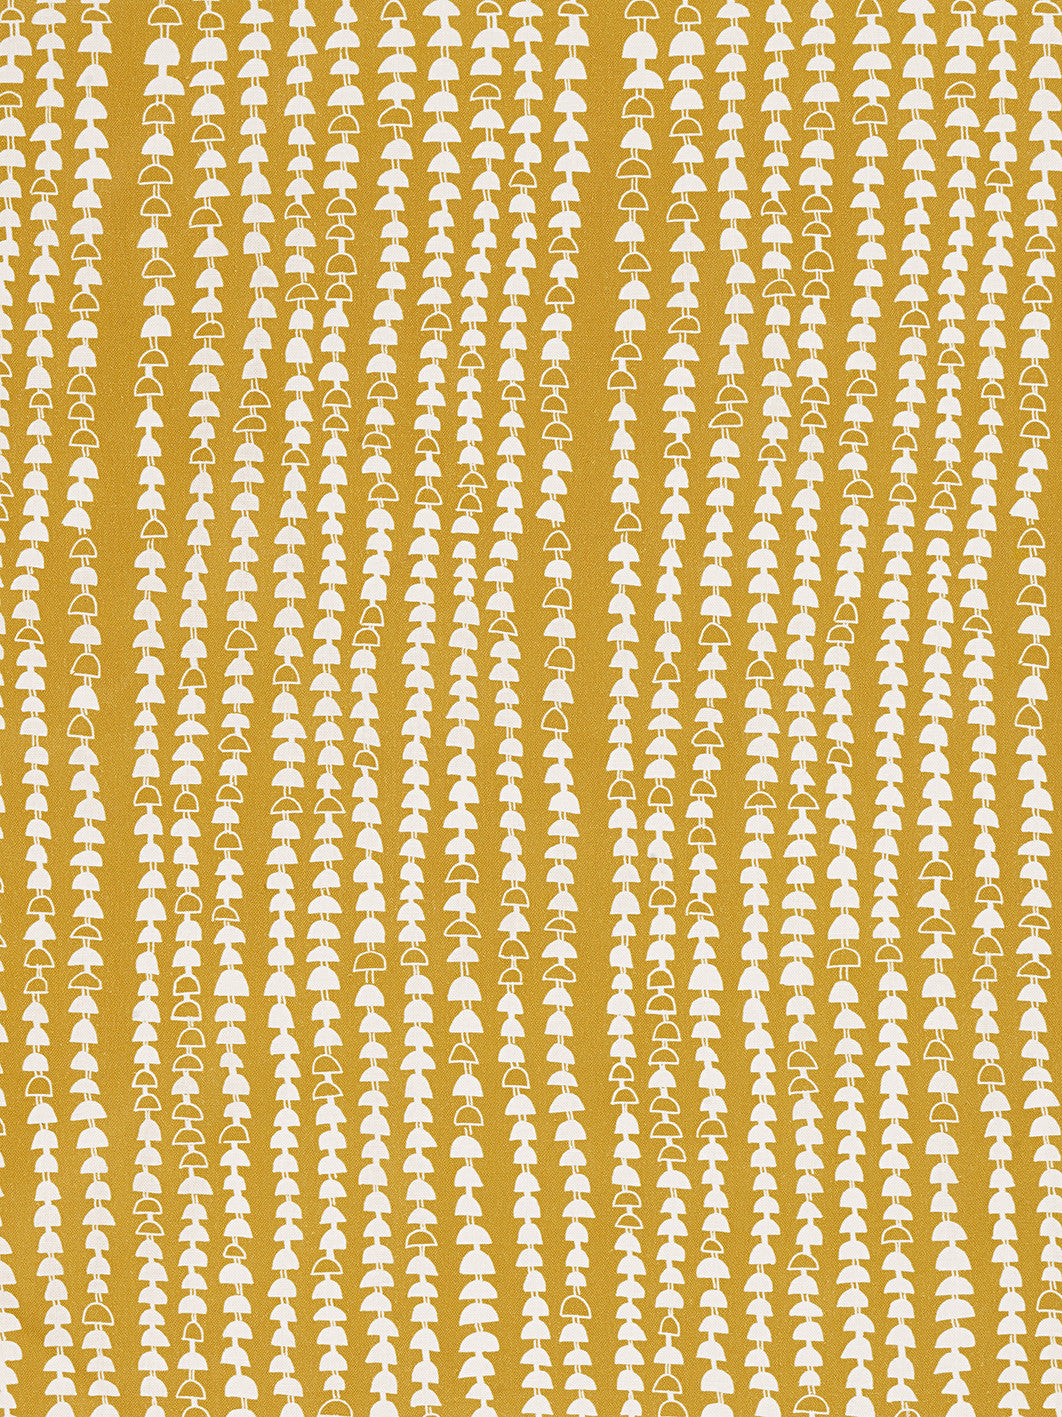 Hopi Graphic Strung Bead Pattern Linen Cotton Designer Home Decor Fabric for curtains, blinds, upholstery in Mustard Gold ships from Canada, USA